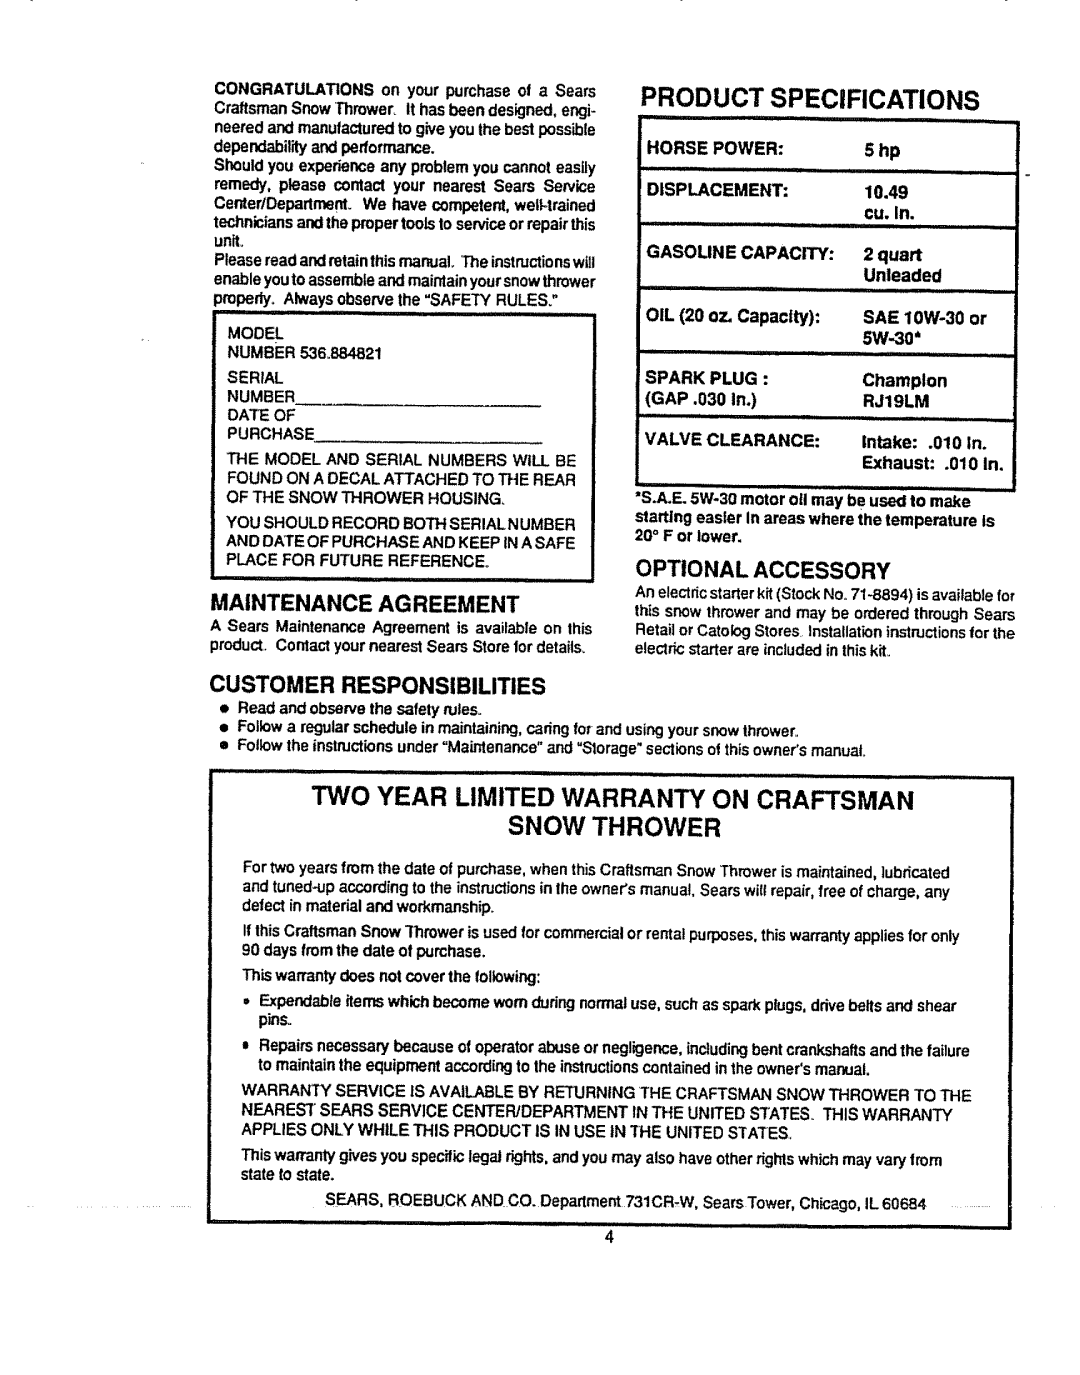 Sears 536.884821 Product Specifications, Two Year Limited Warranty On Craftsman, Snow Thrower, Customer Responsibilities 